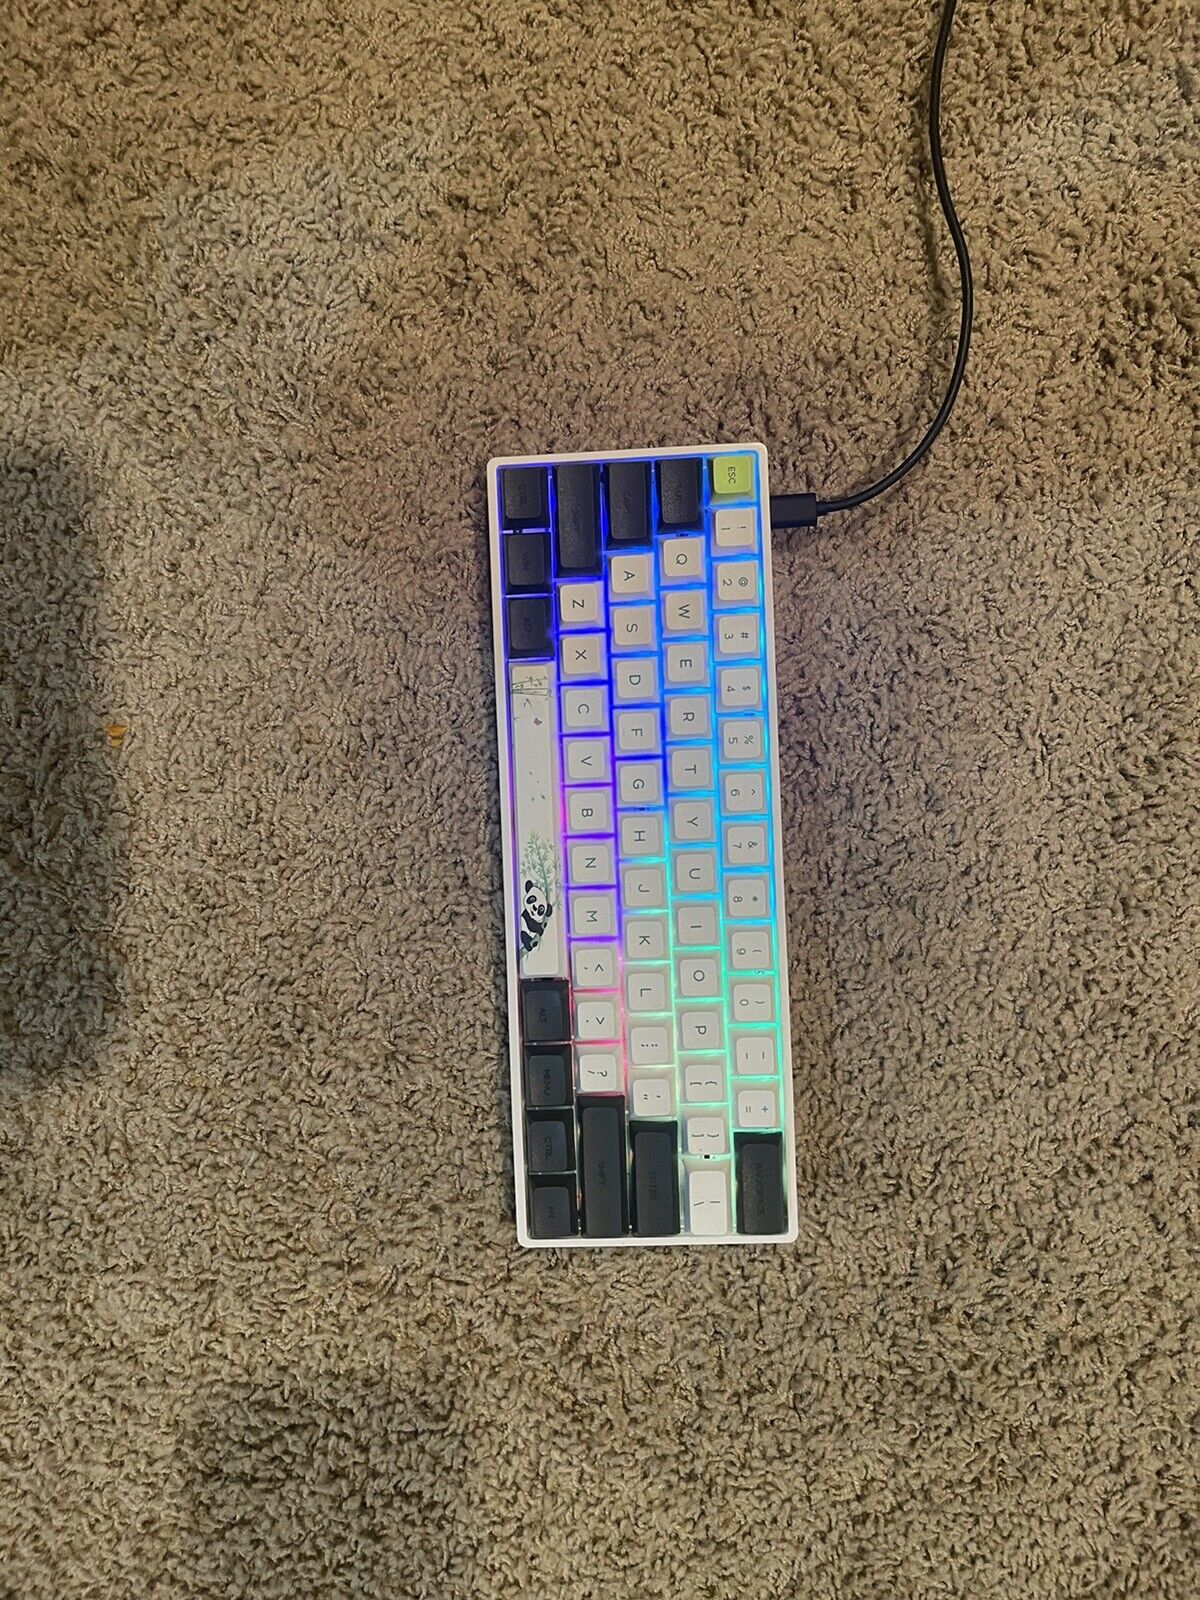 60% Panda Gaming Keyboard  (Comes With Cable)